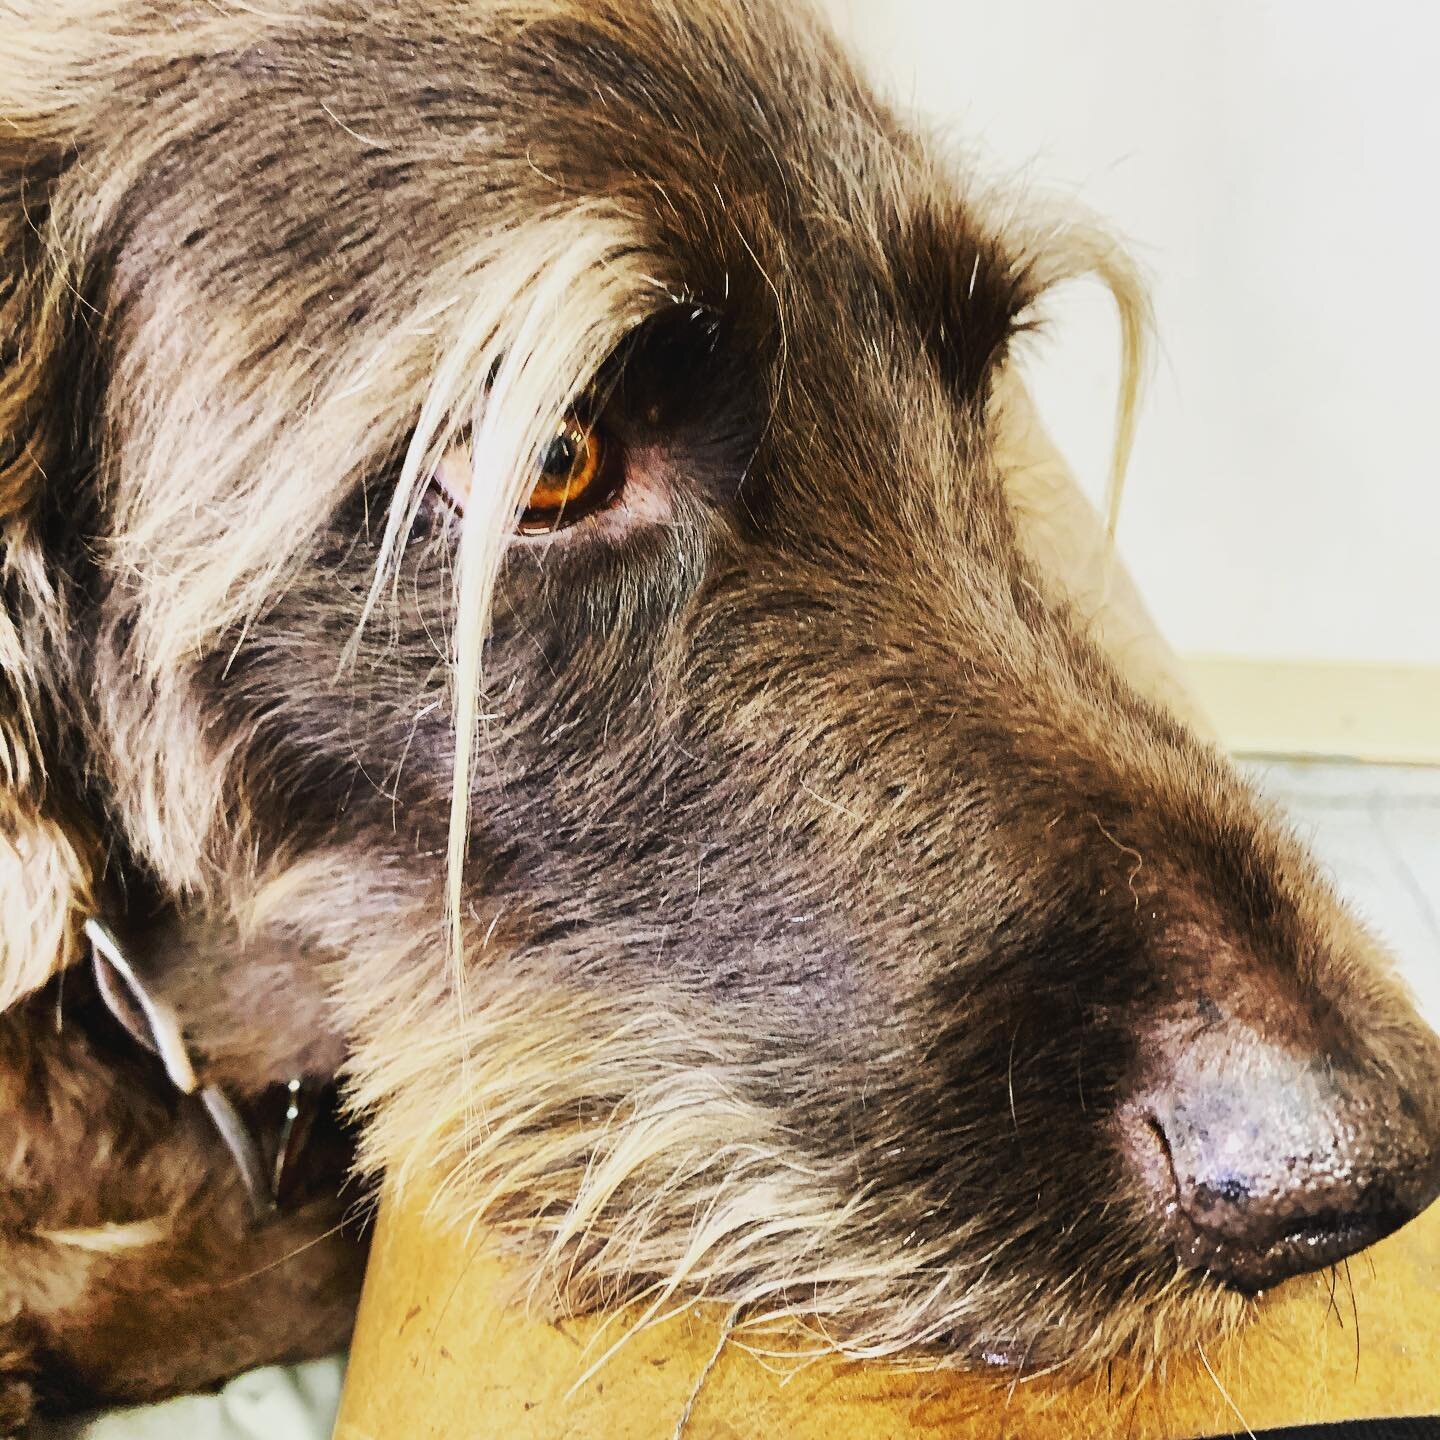 Best Brows Ever!  #mac #peacelovepetcare #steamboatsprings #steamboatdogs #bestbrows #dogsofinstagram #dogbrows